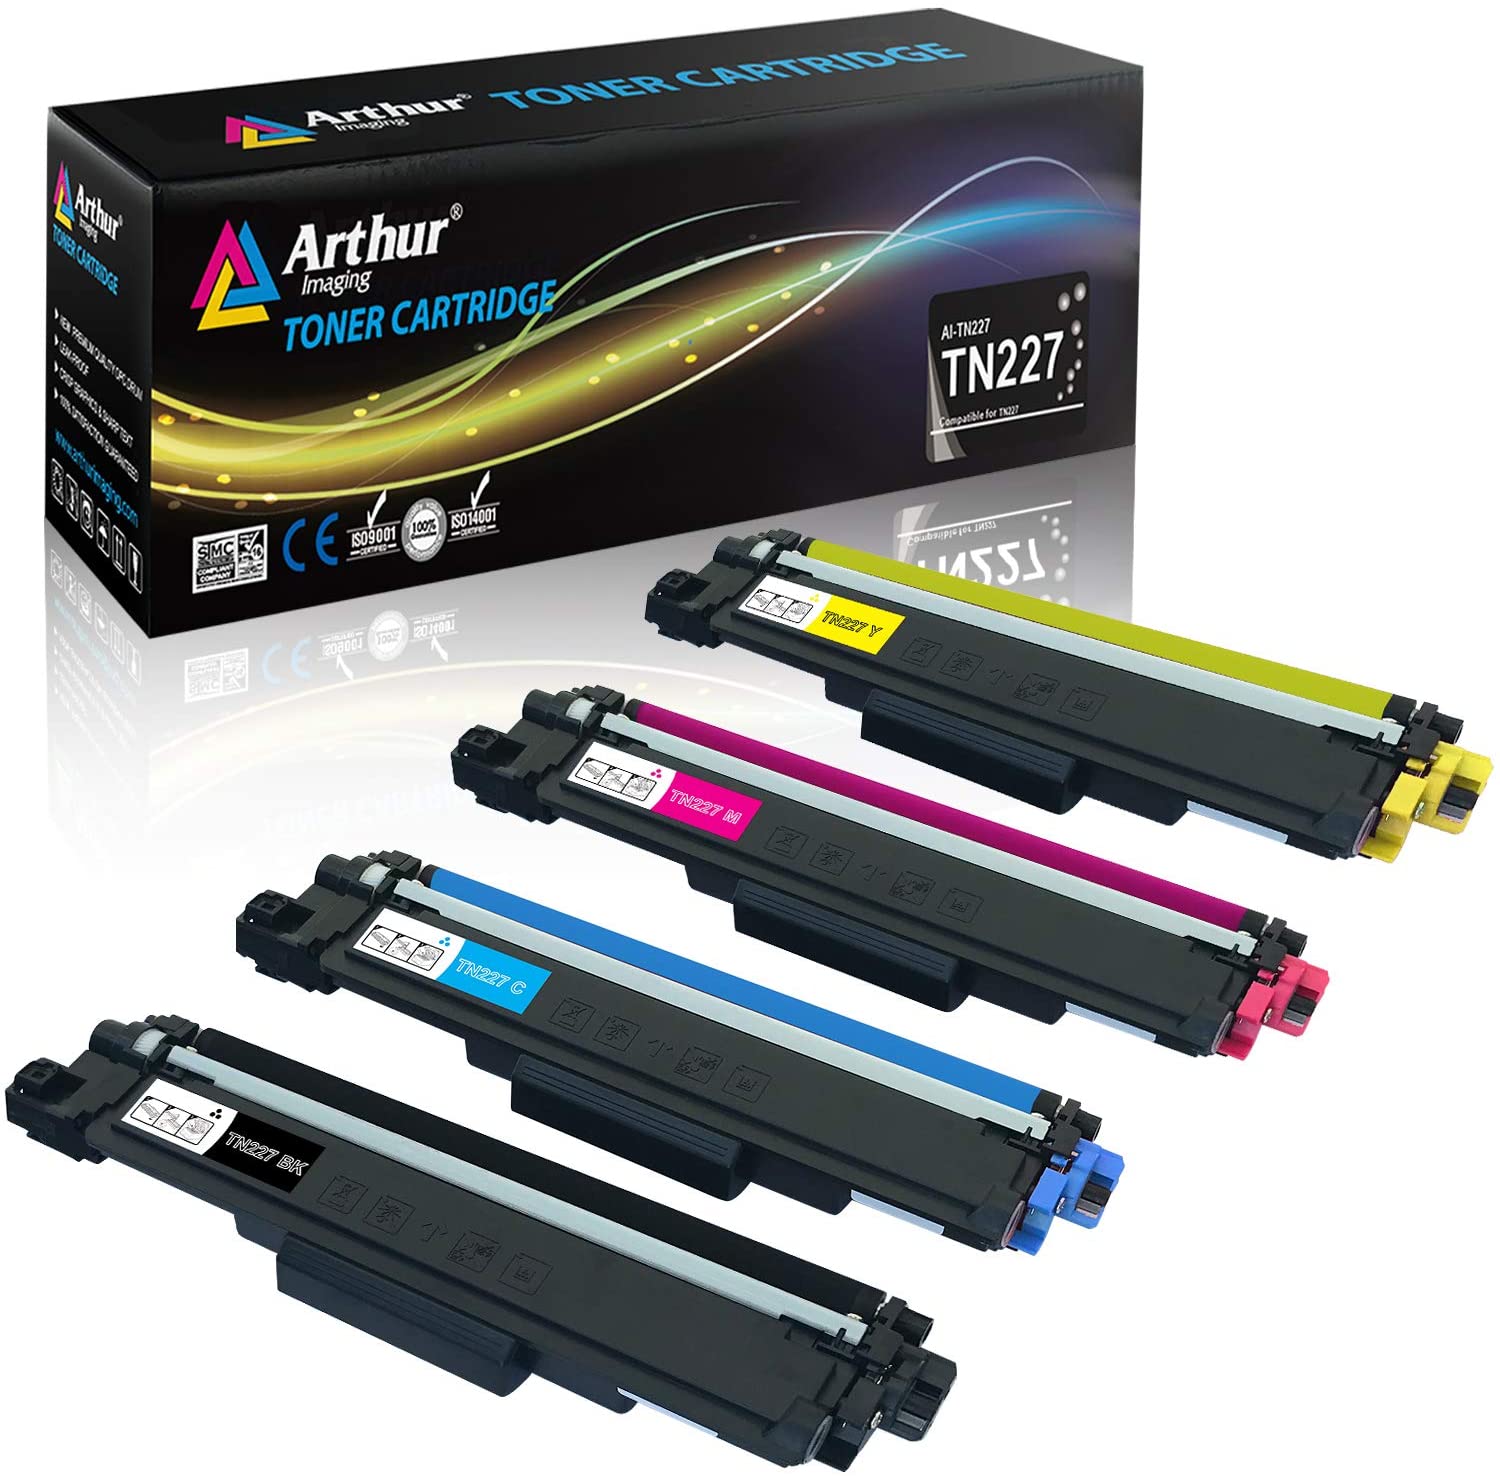 Arthur Imaging Compatible Toner Cartridges Replacement for Brother TN227 (Black, Cyan, Yellow, Magenta, 4-pack)